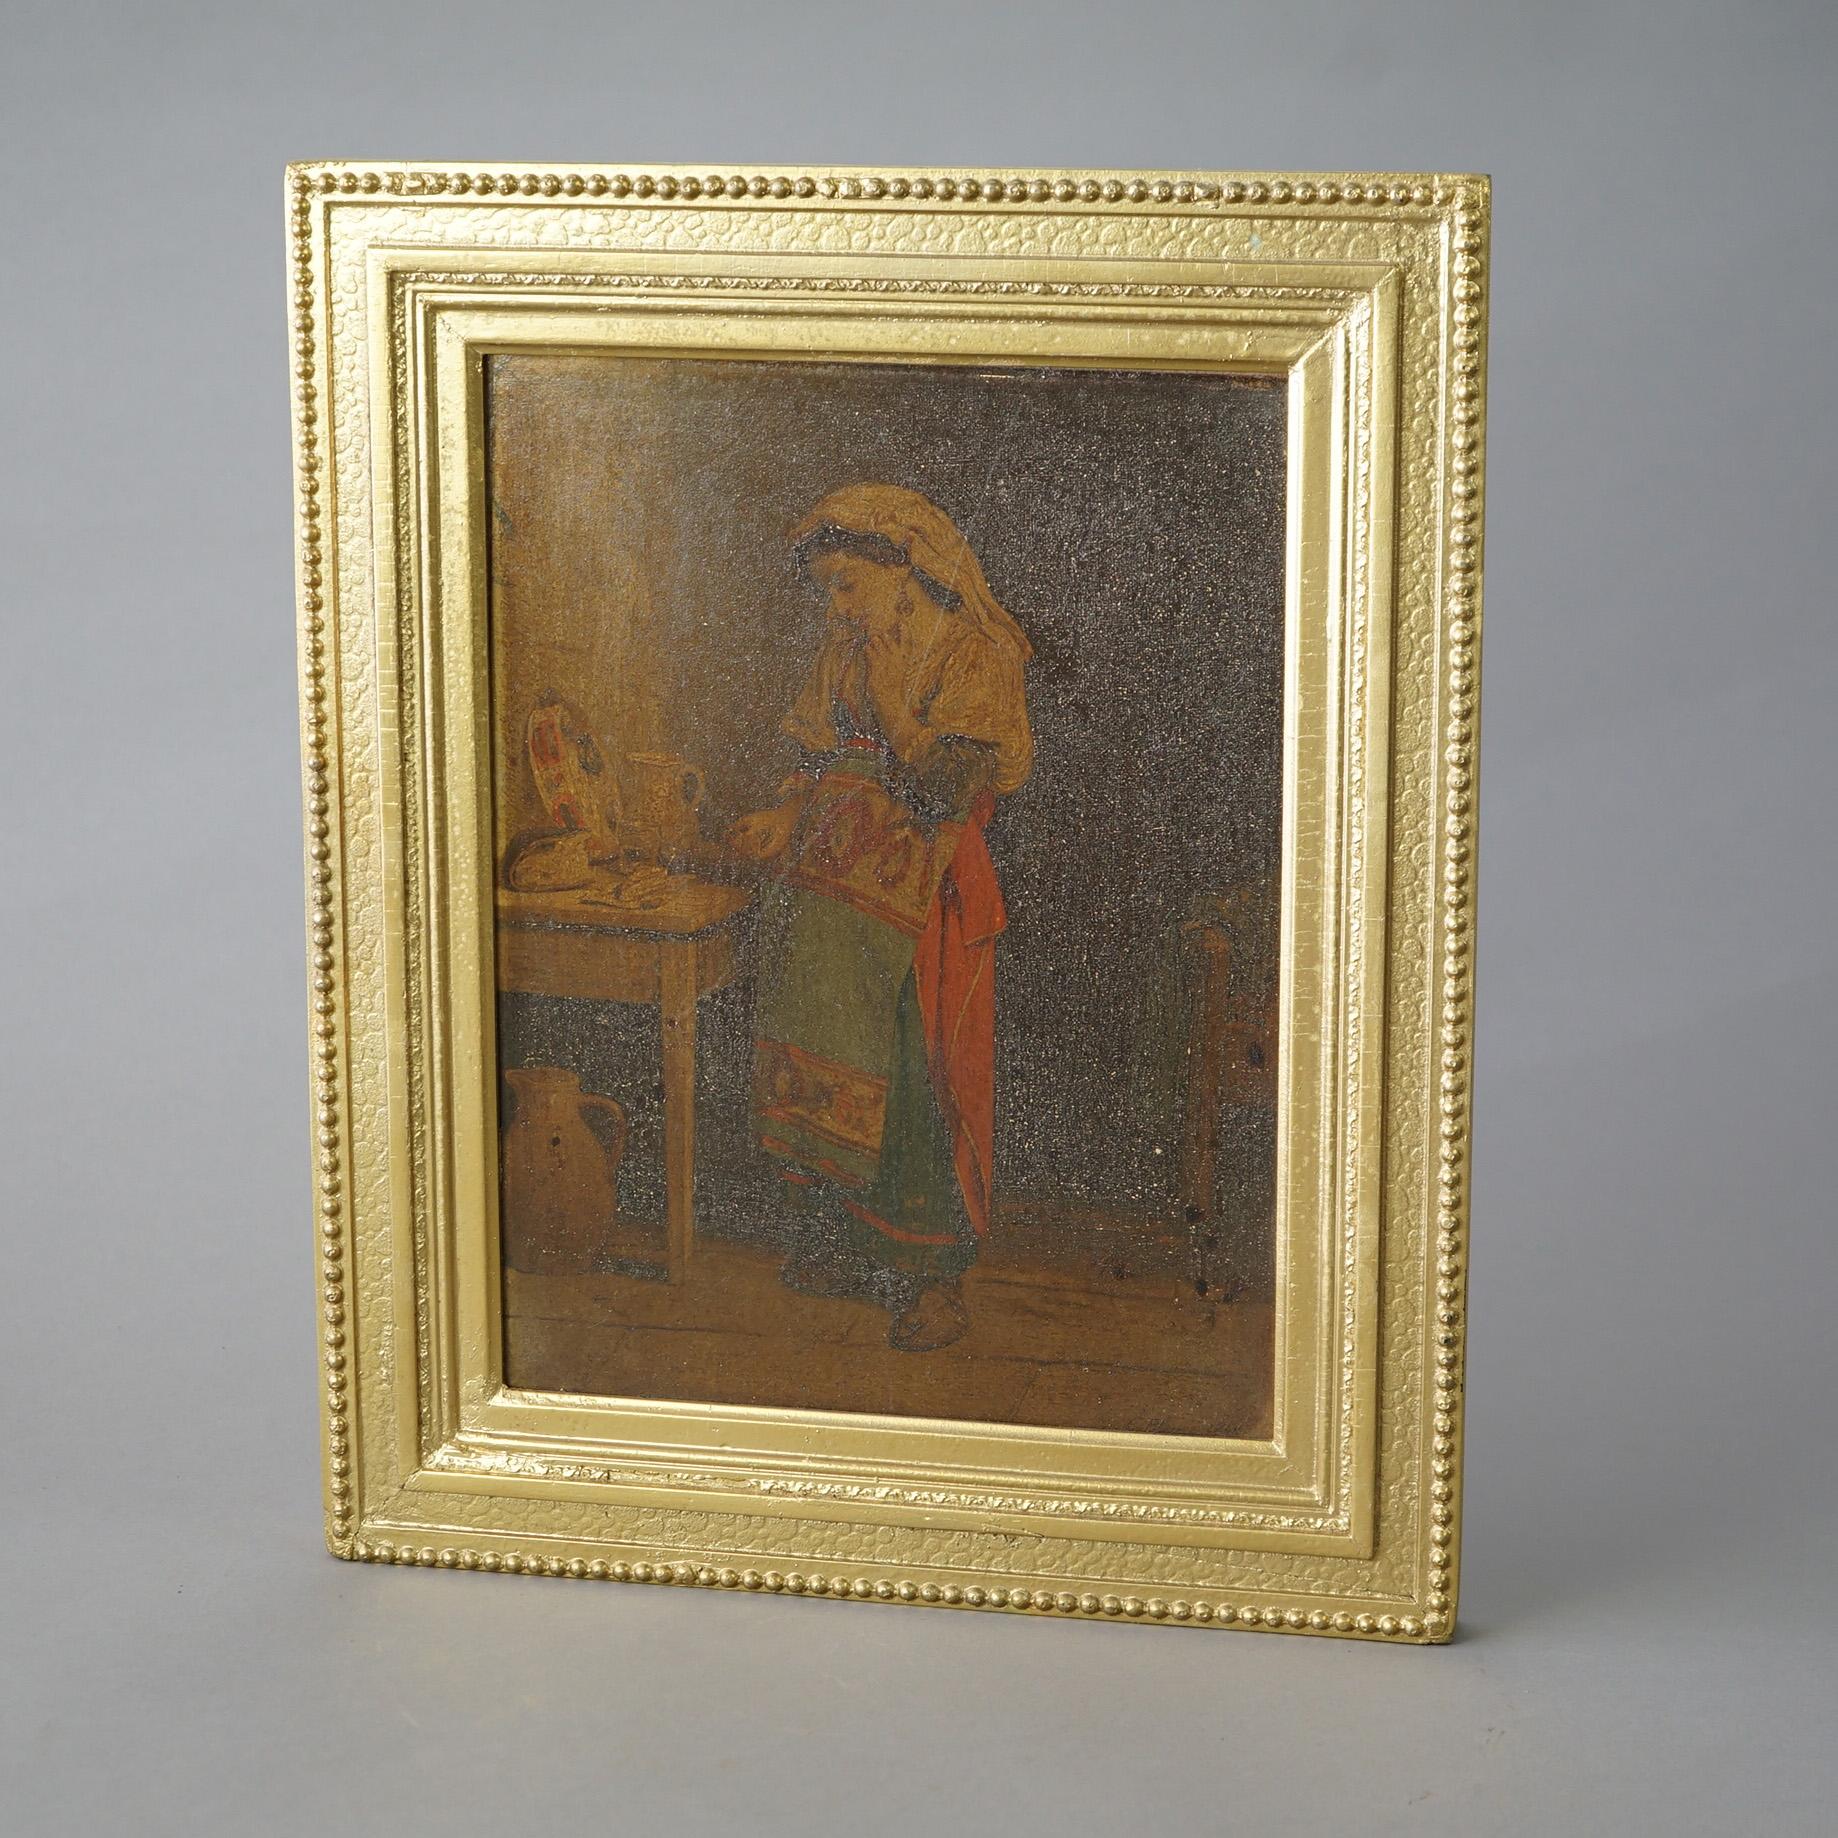 Hand-Painted Antique Portrait Oil Painting on Wood Panel, Artist Signed Lower Right 19th C For Sale